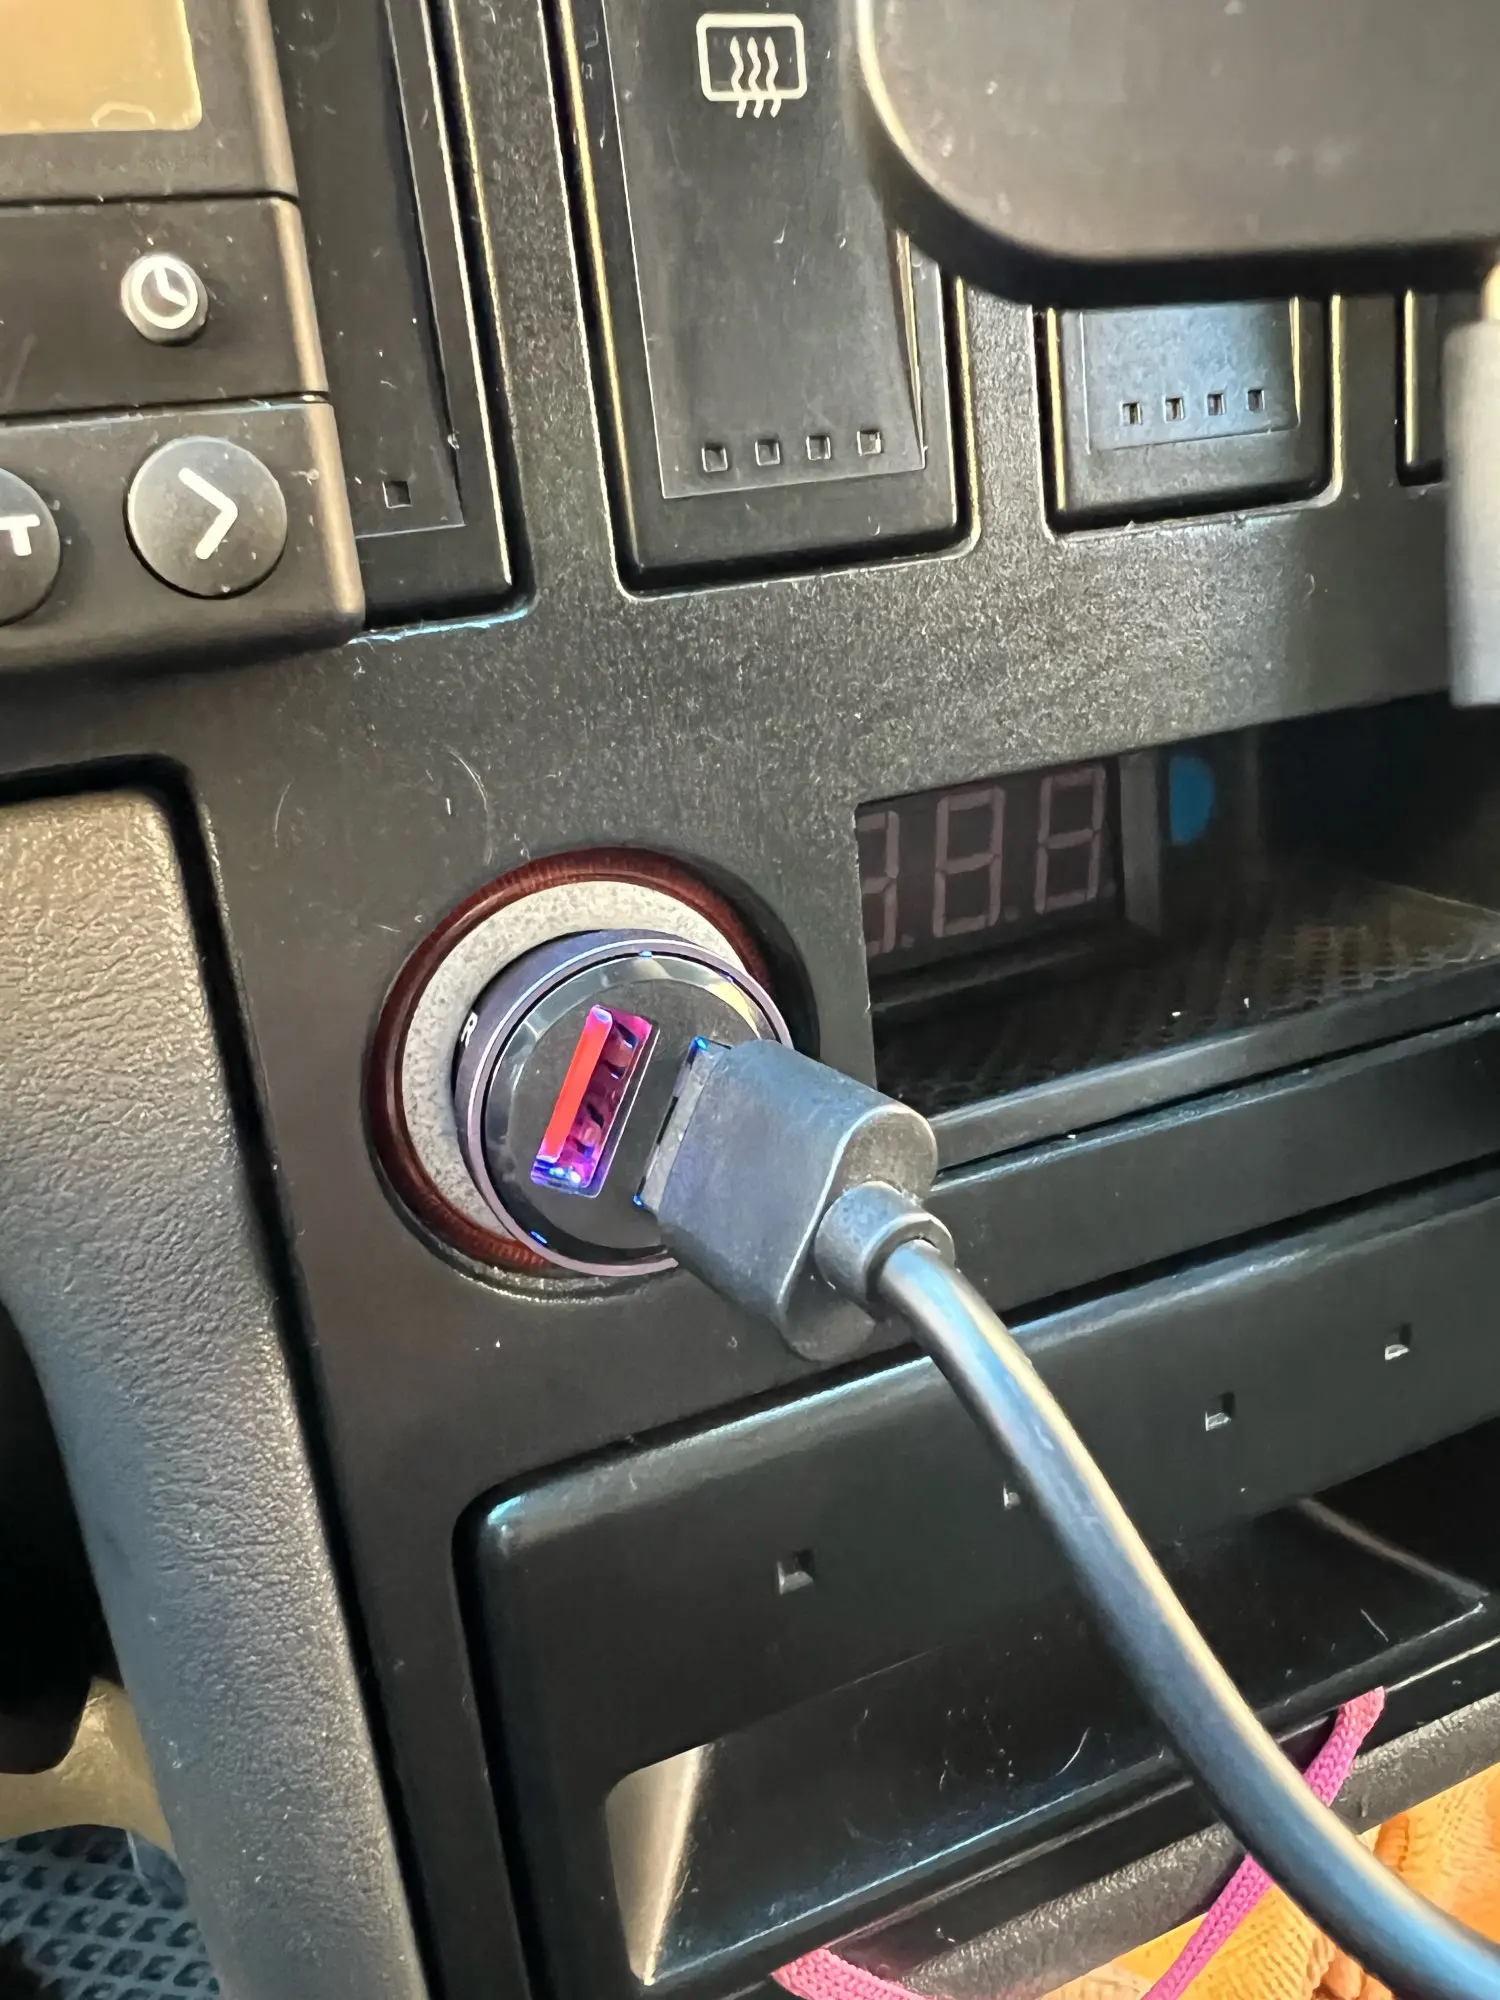 Essager 30W USB Car Charger photo review